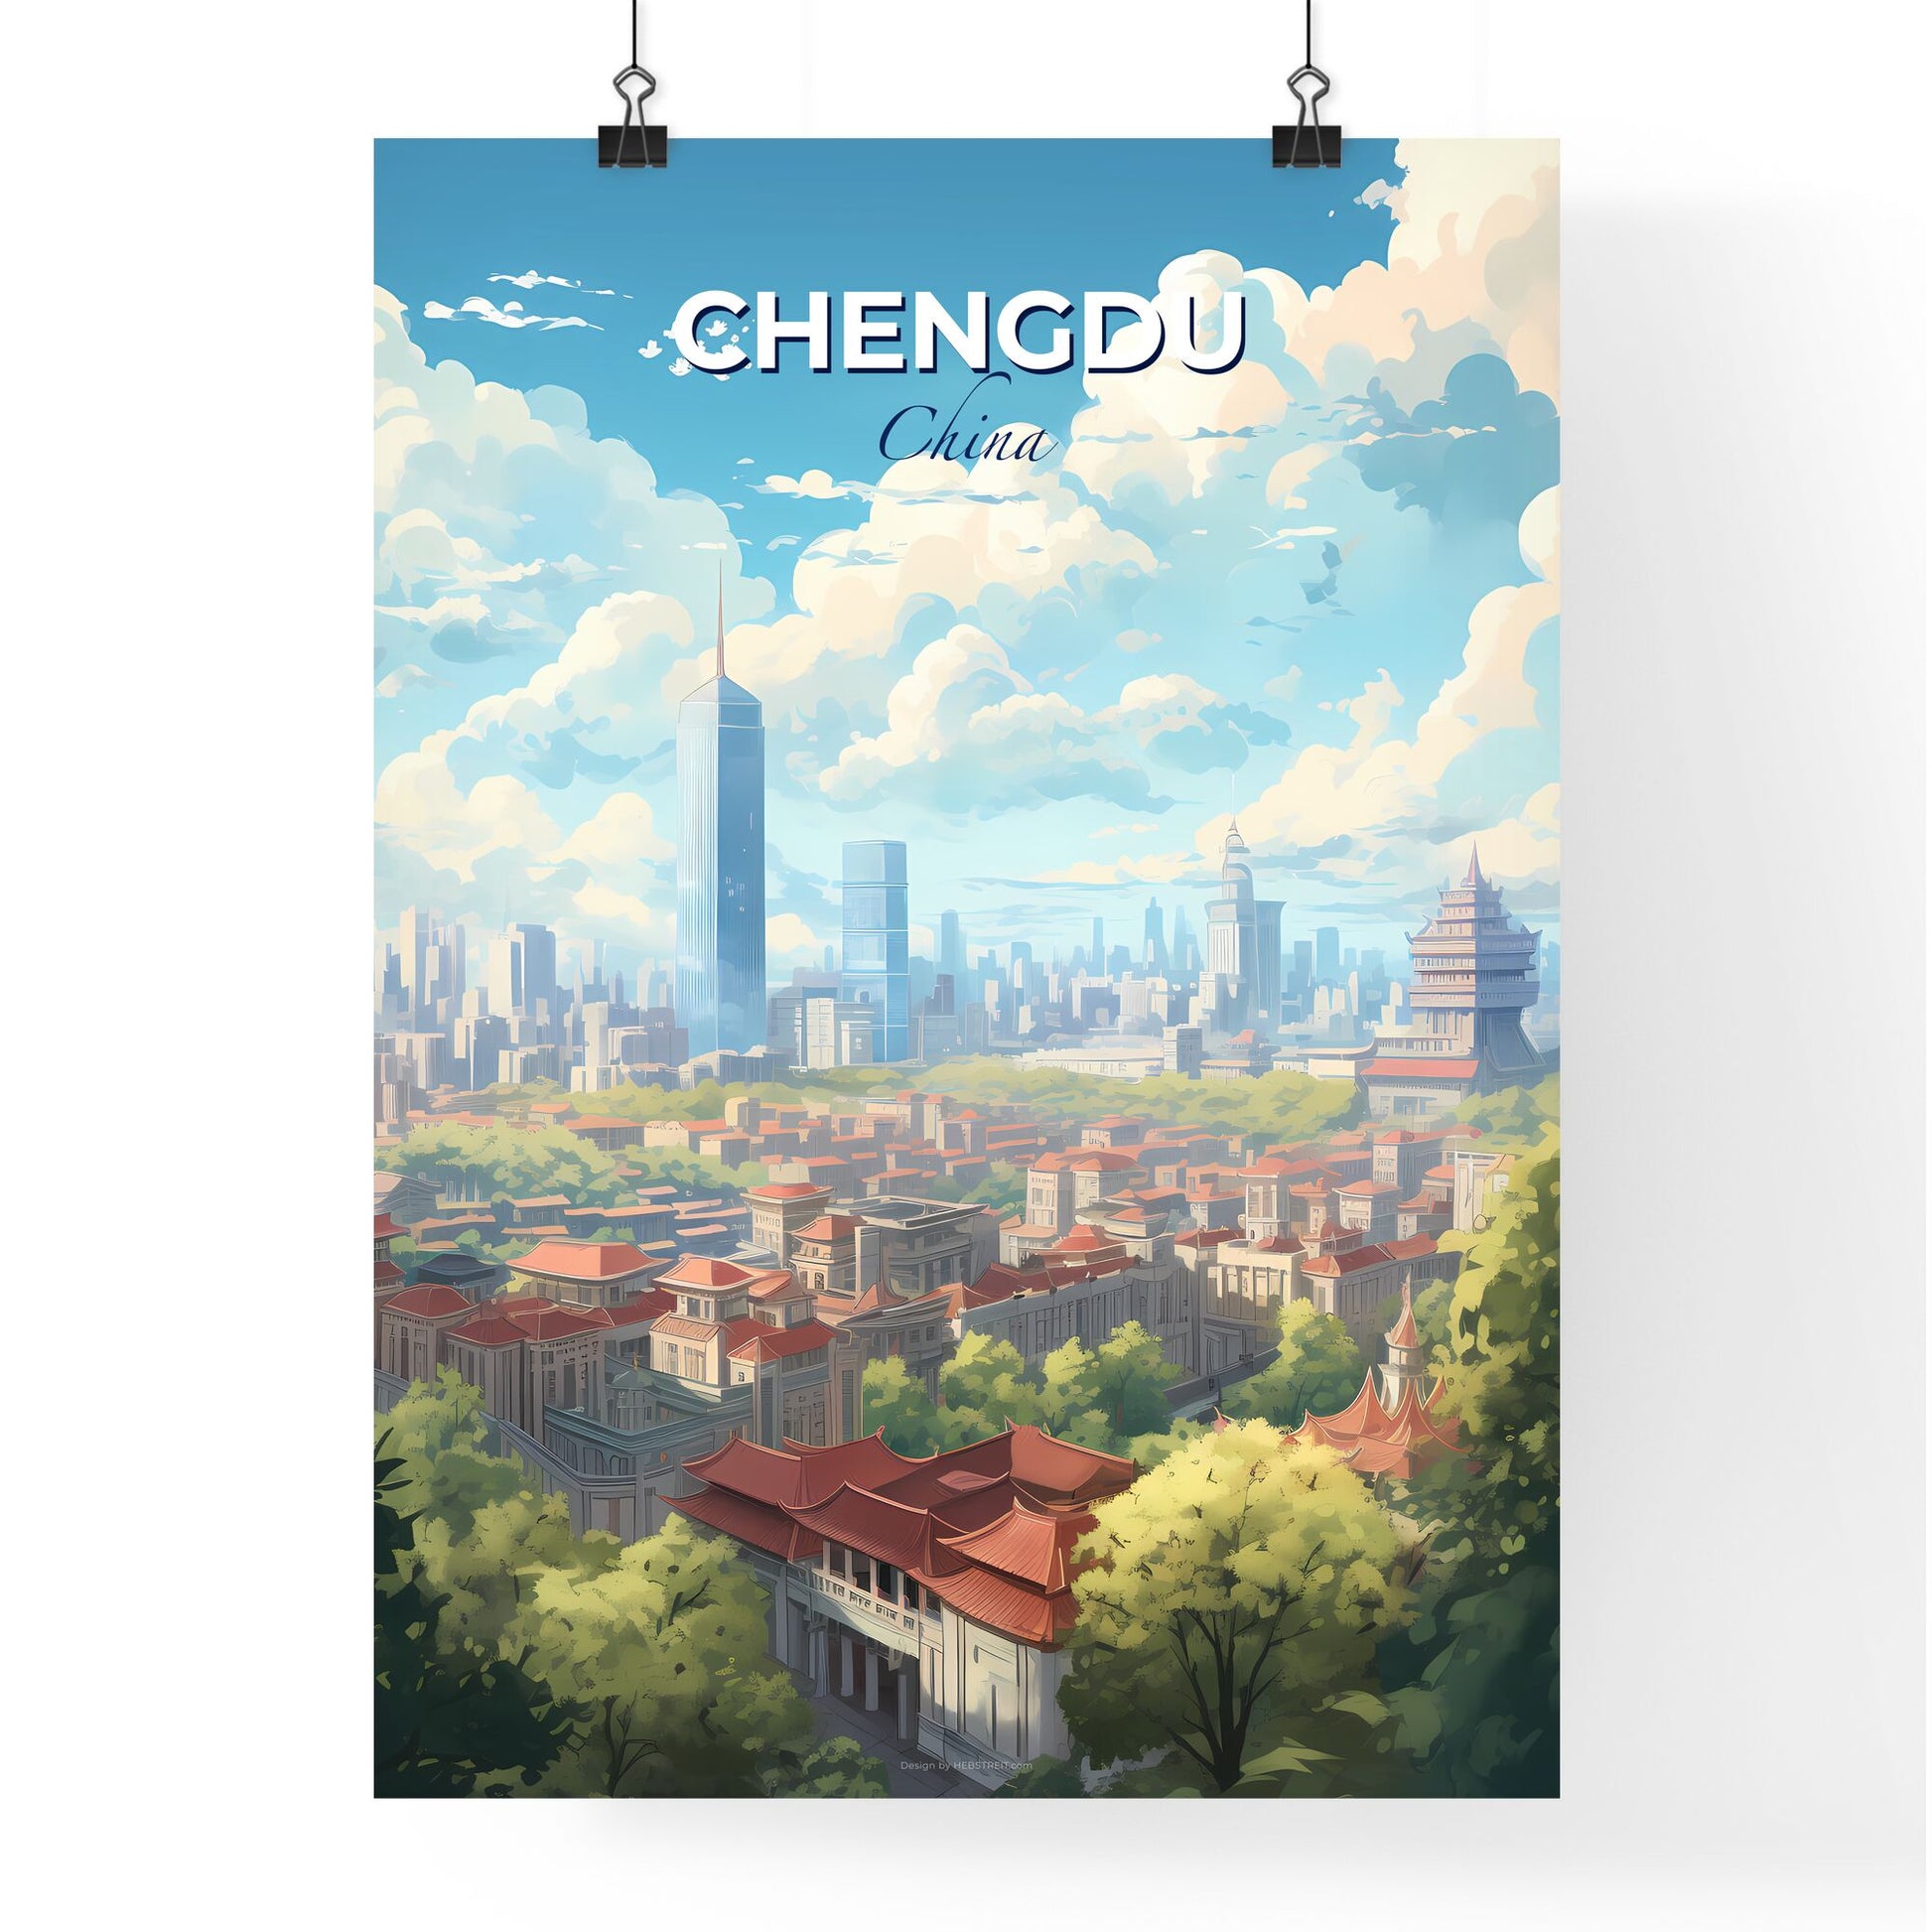 Chengdu China Skyline - A City With Many Buildings And Trees - Customizable Travel Gift Default Title